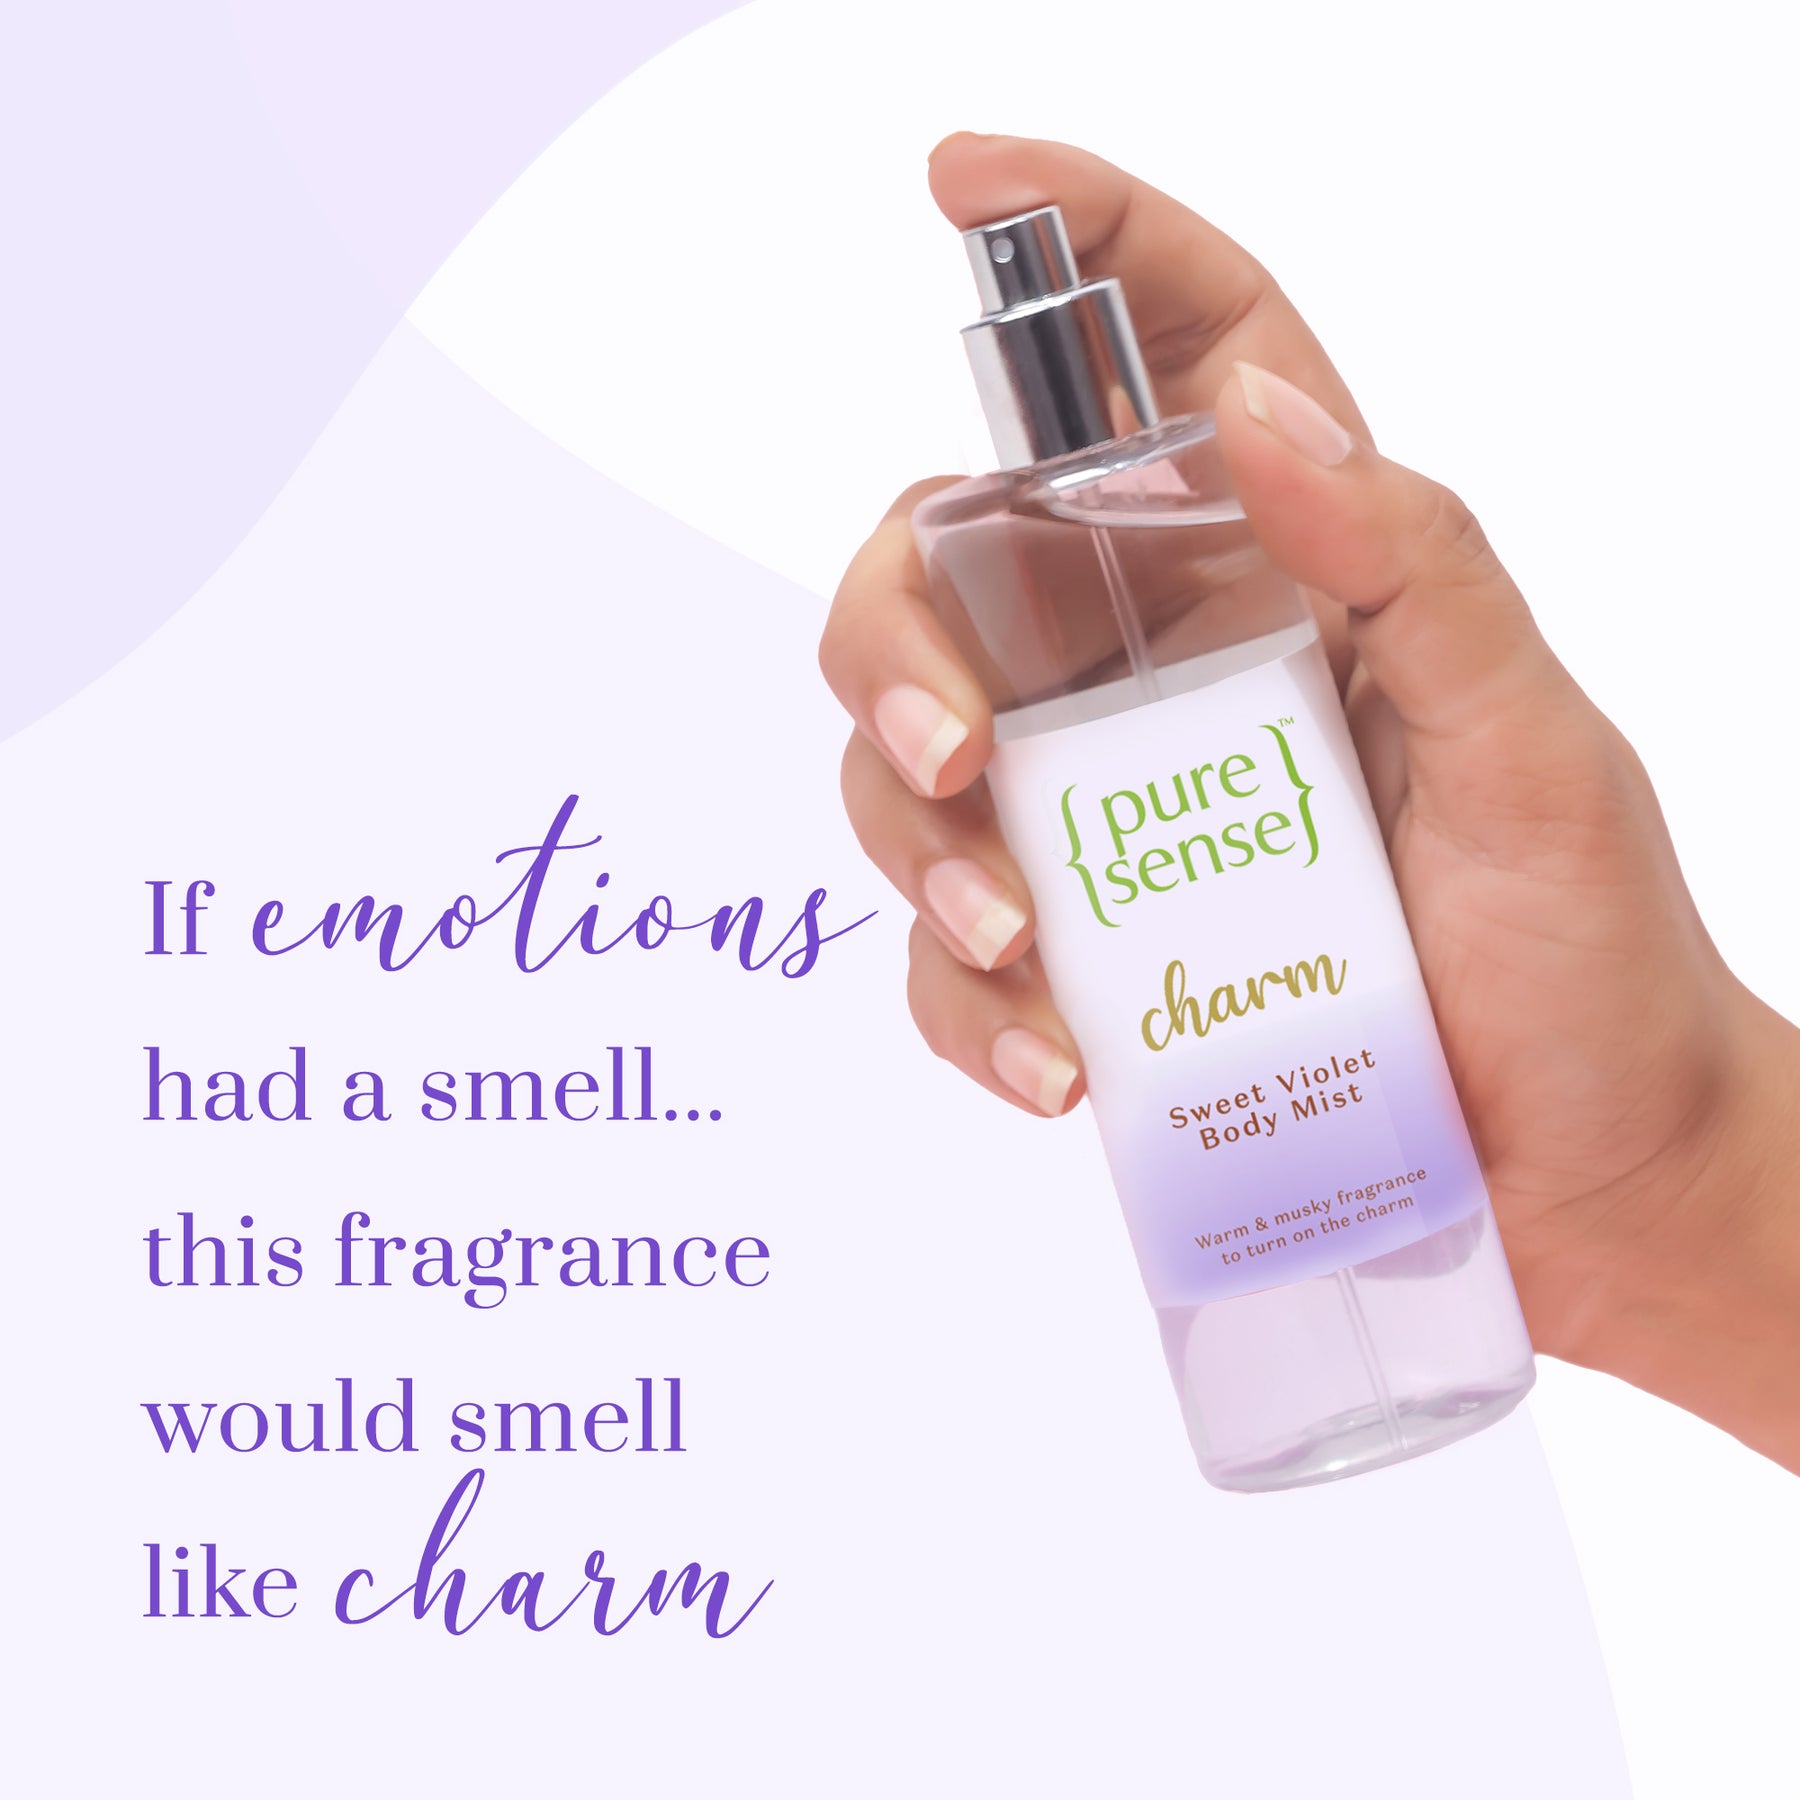 Charm Sweet Violet Body Mist | From the makers of Parachute Advansed | 150ml - PureSense